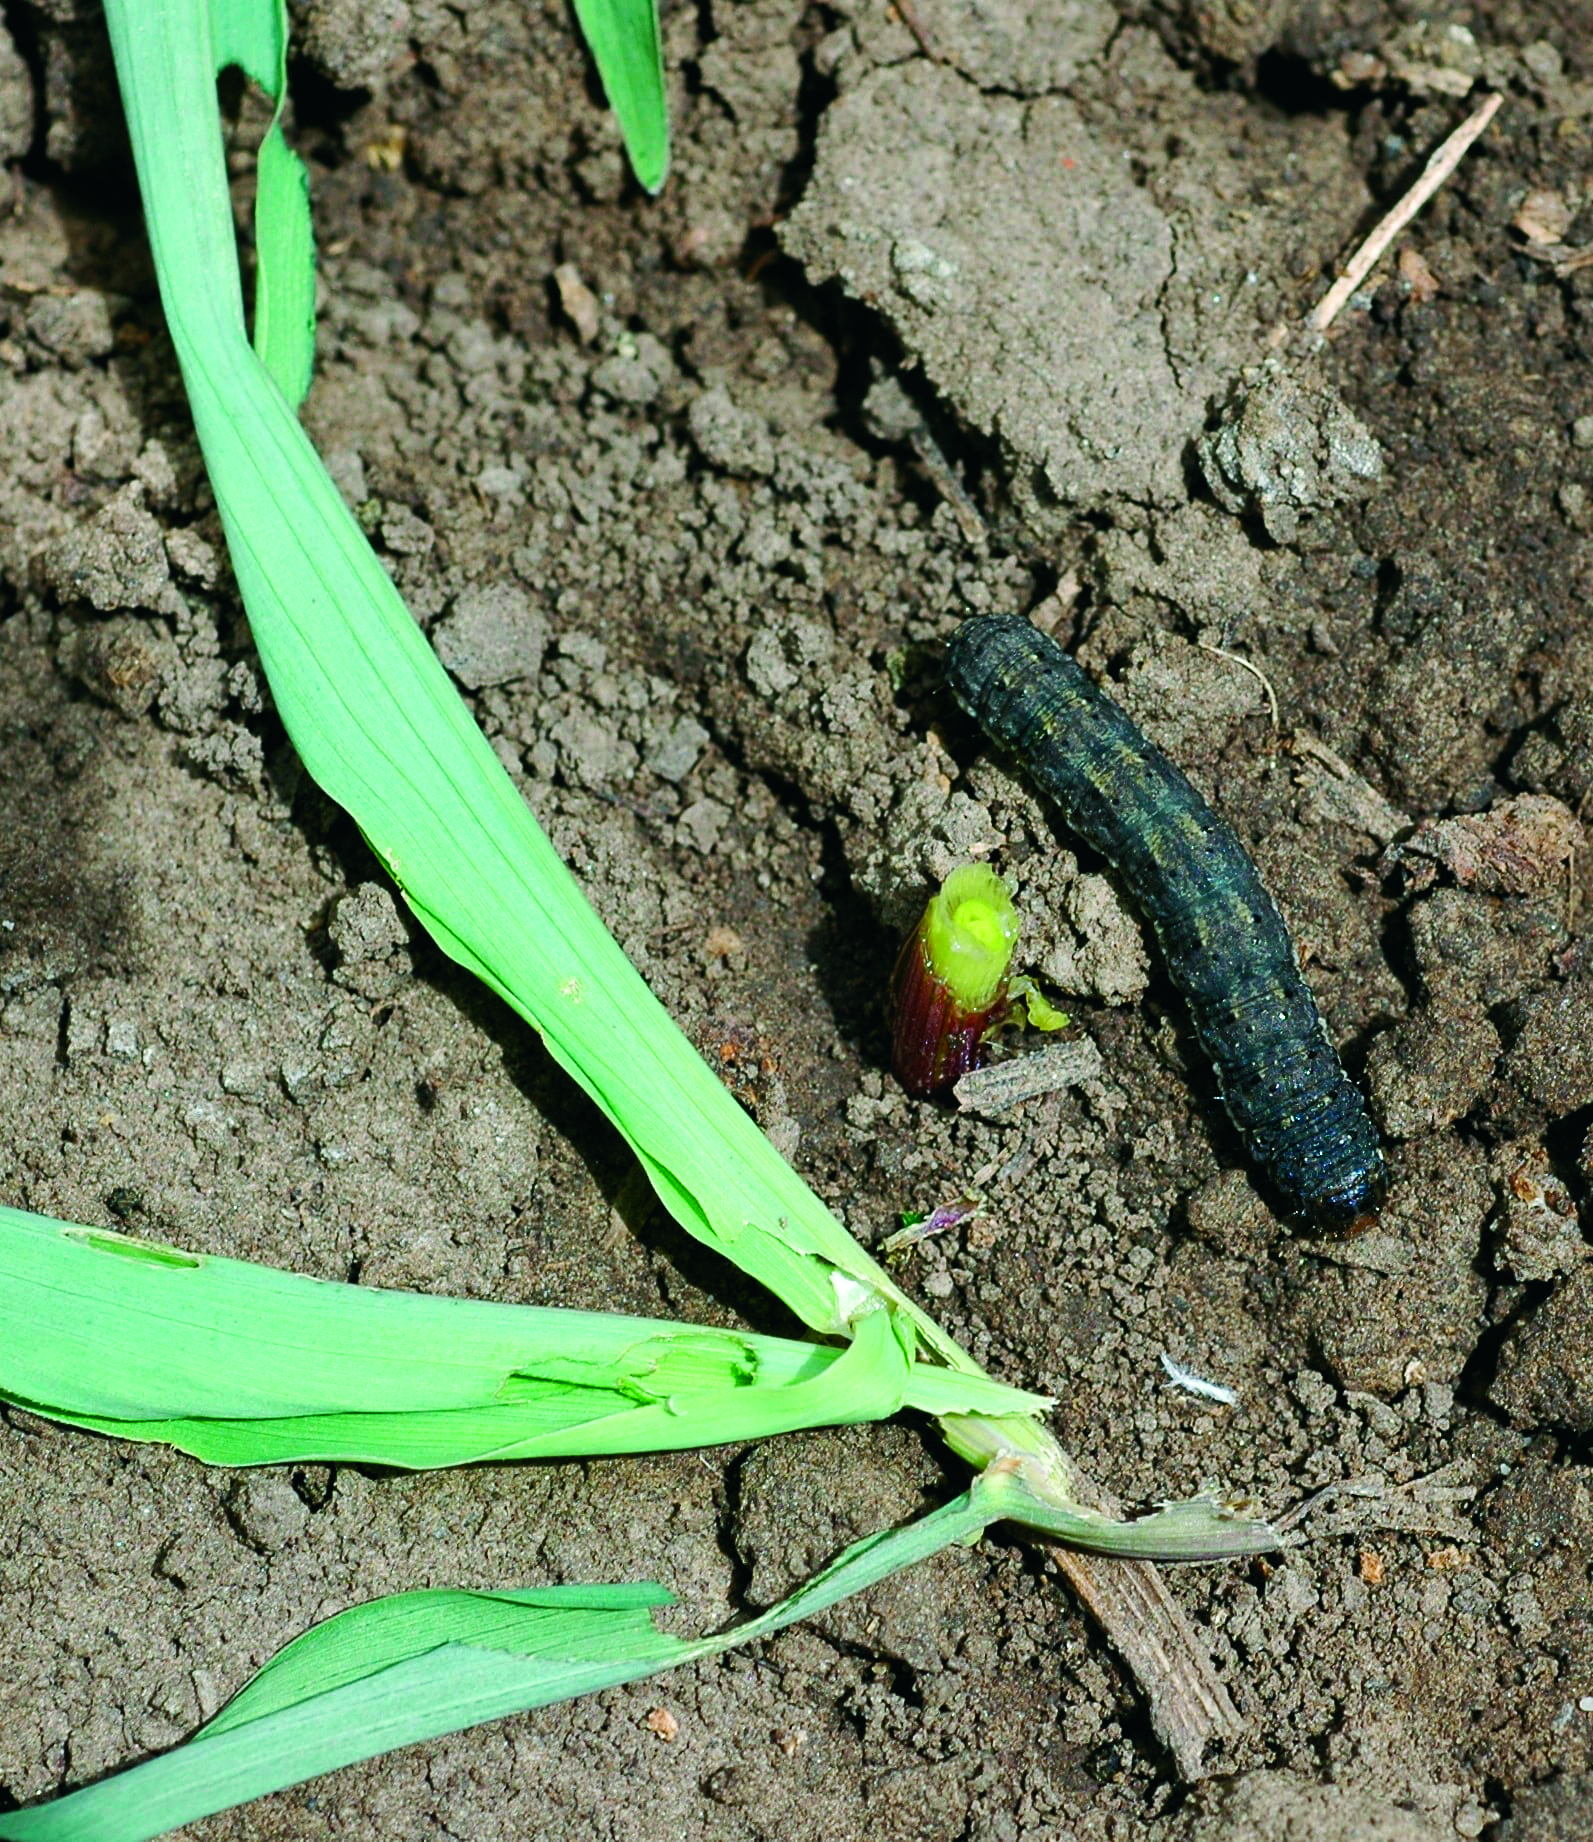 Black cutworm larvae cause the most damage in their third and fourth stages of growth, when they are about ½-¾” long.